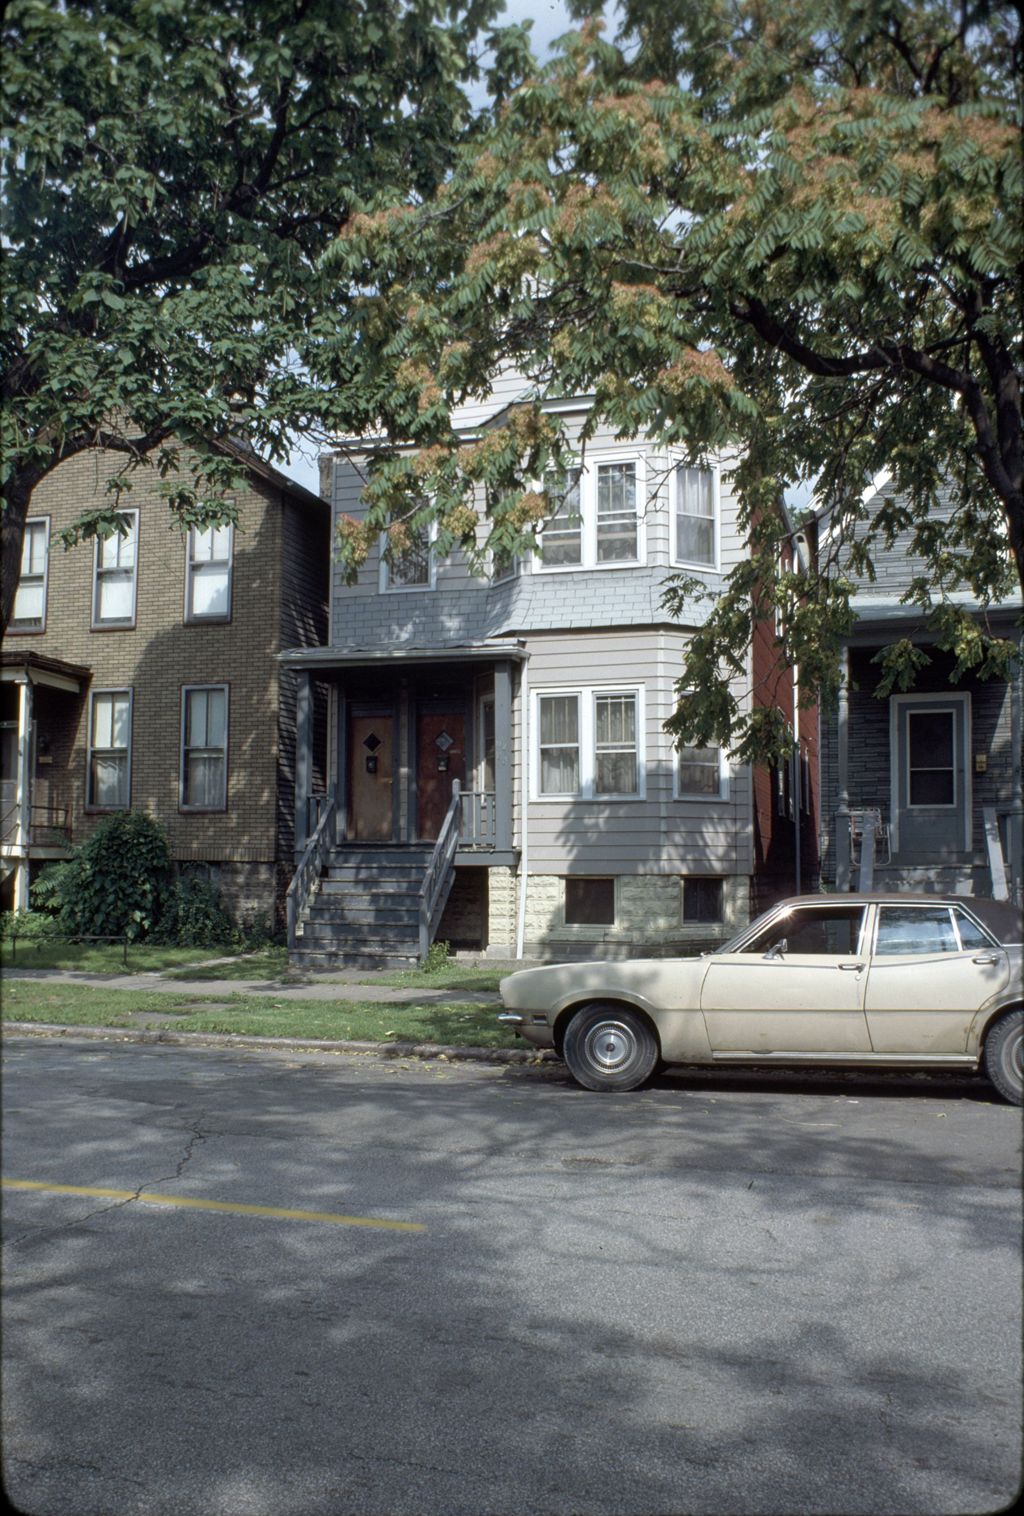 Houses and apartments, South Emerald Avenue